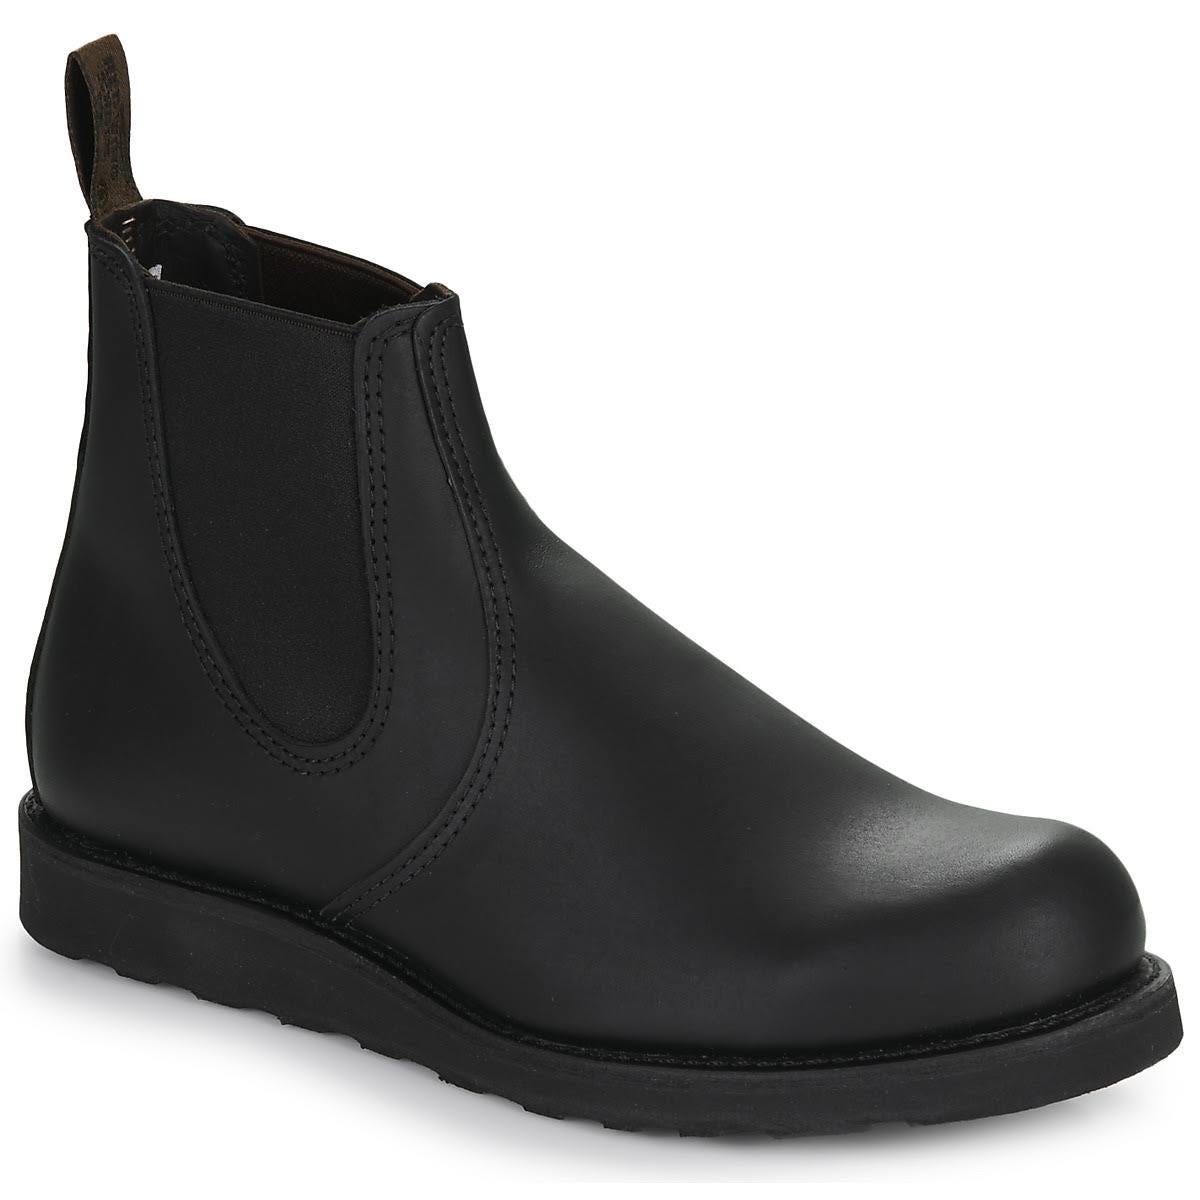 Classic Black Chelsea Boots for Men: Durable and Stylish Shoe | Image